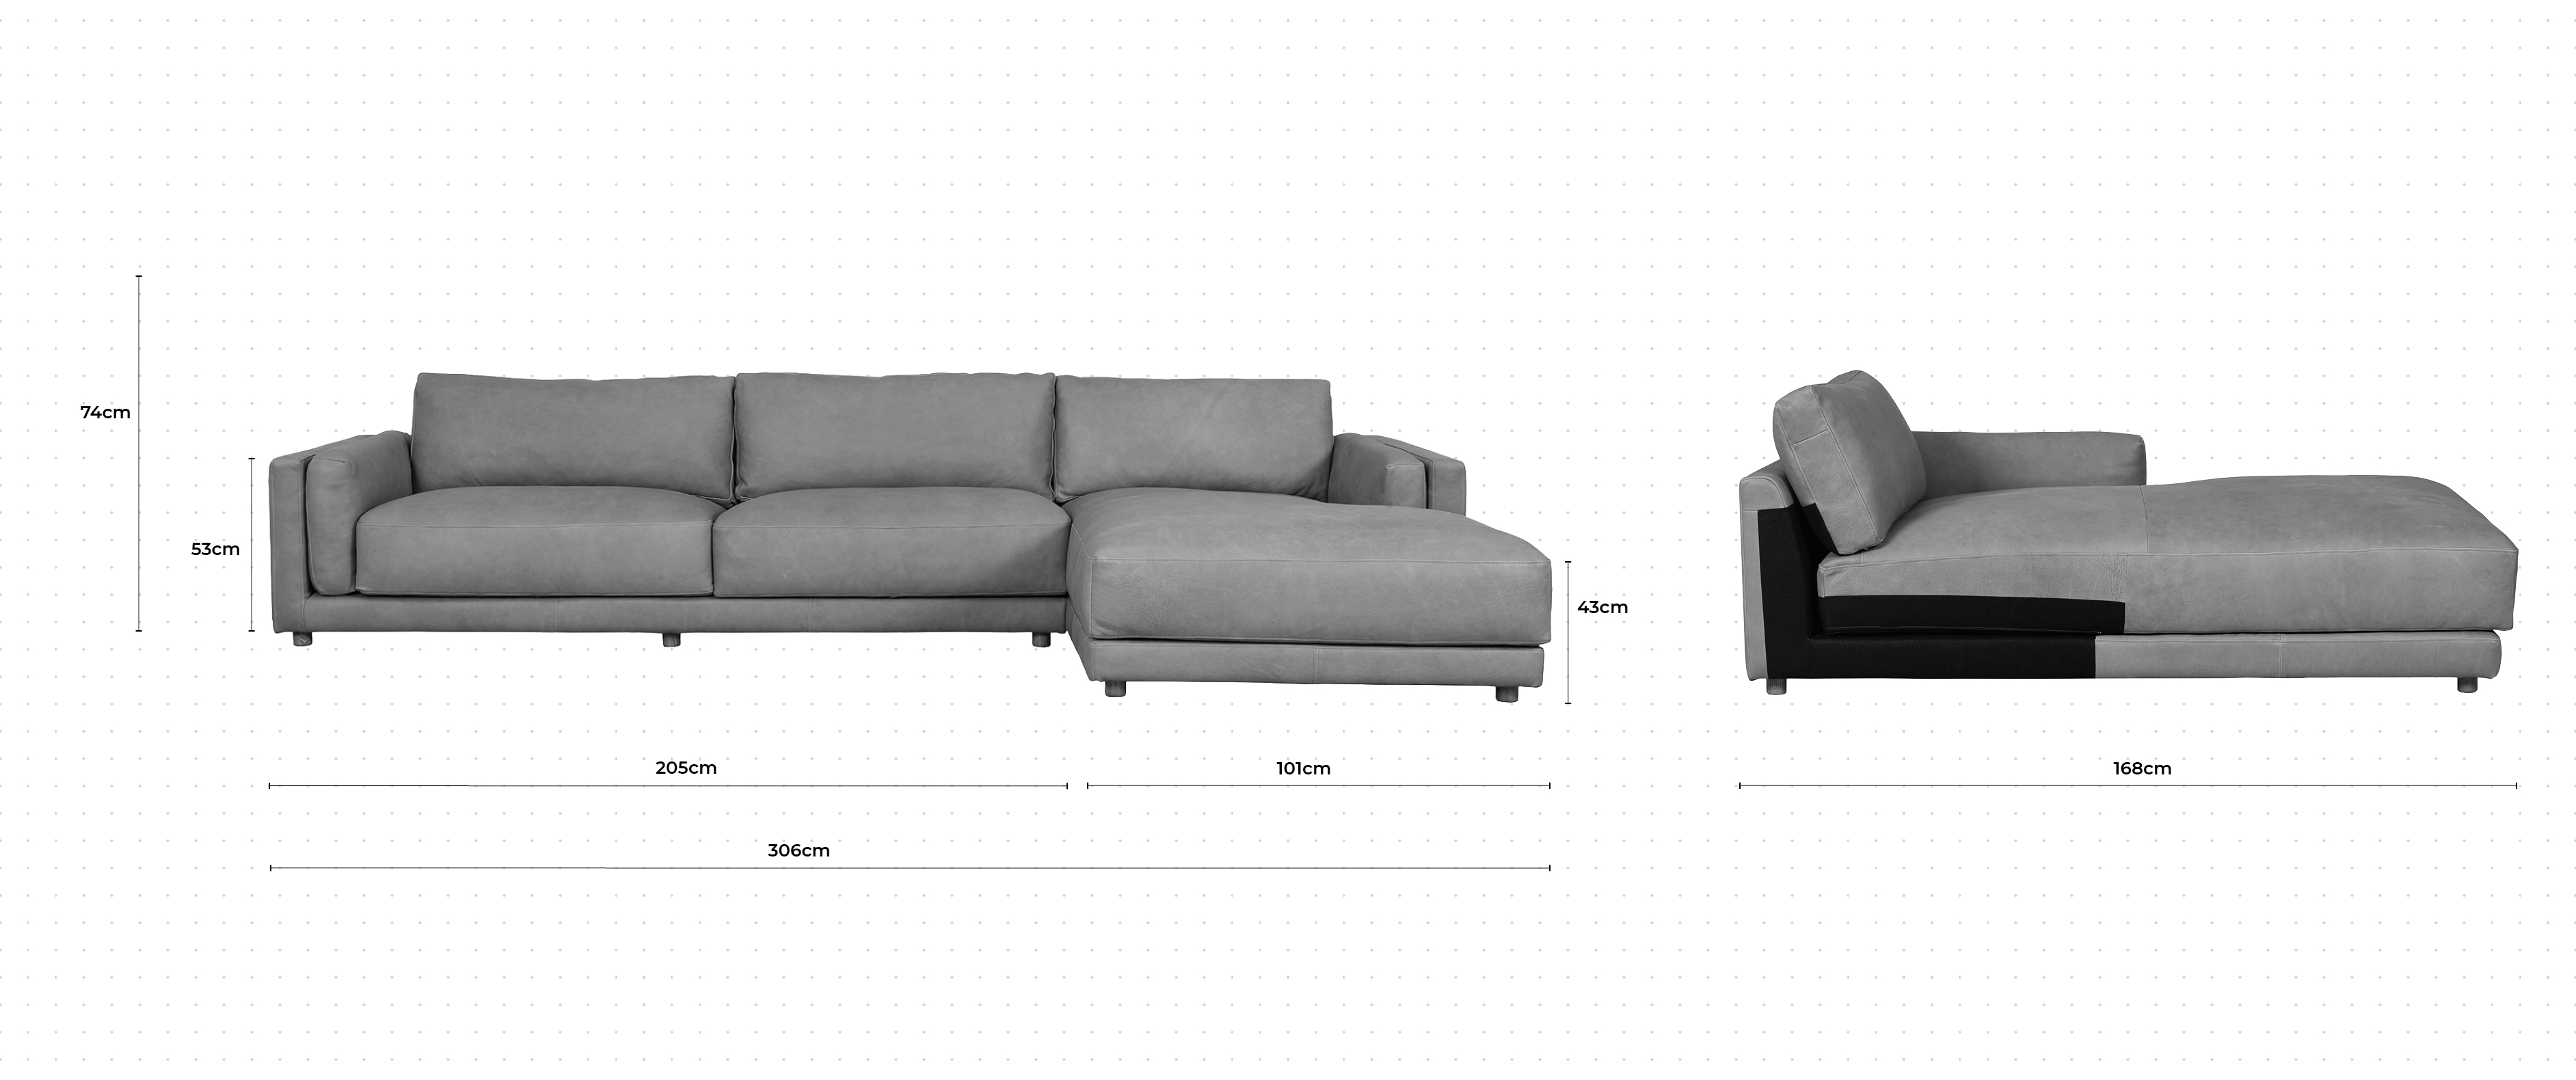 Butter Large Chaise Sofa RHF dimensions